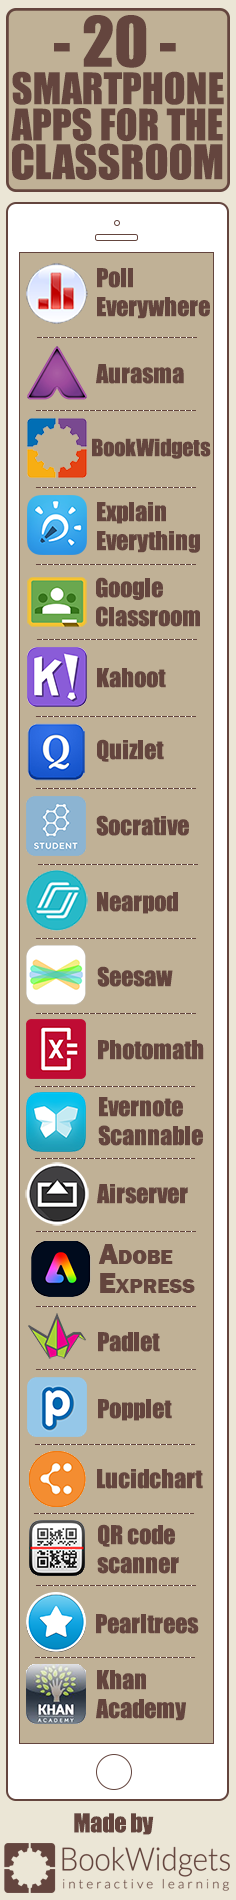 Smartphone apps for in the classroom